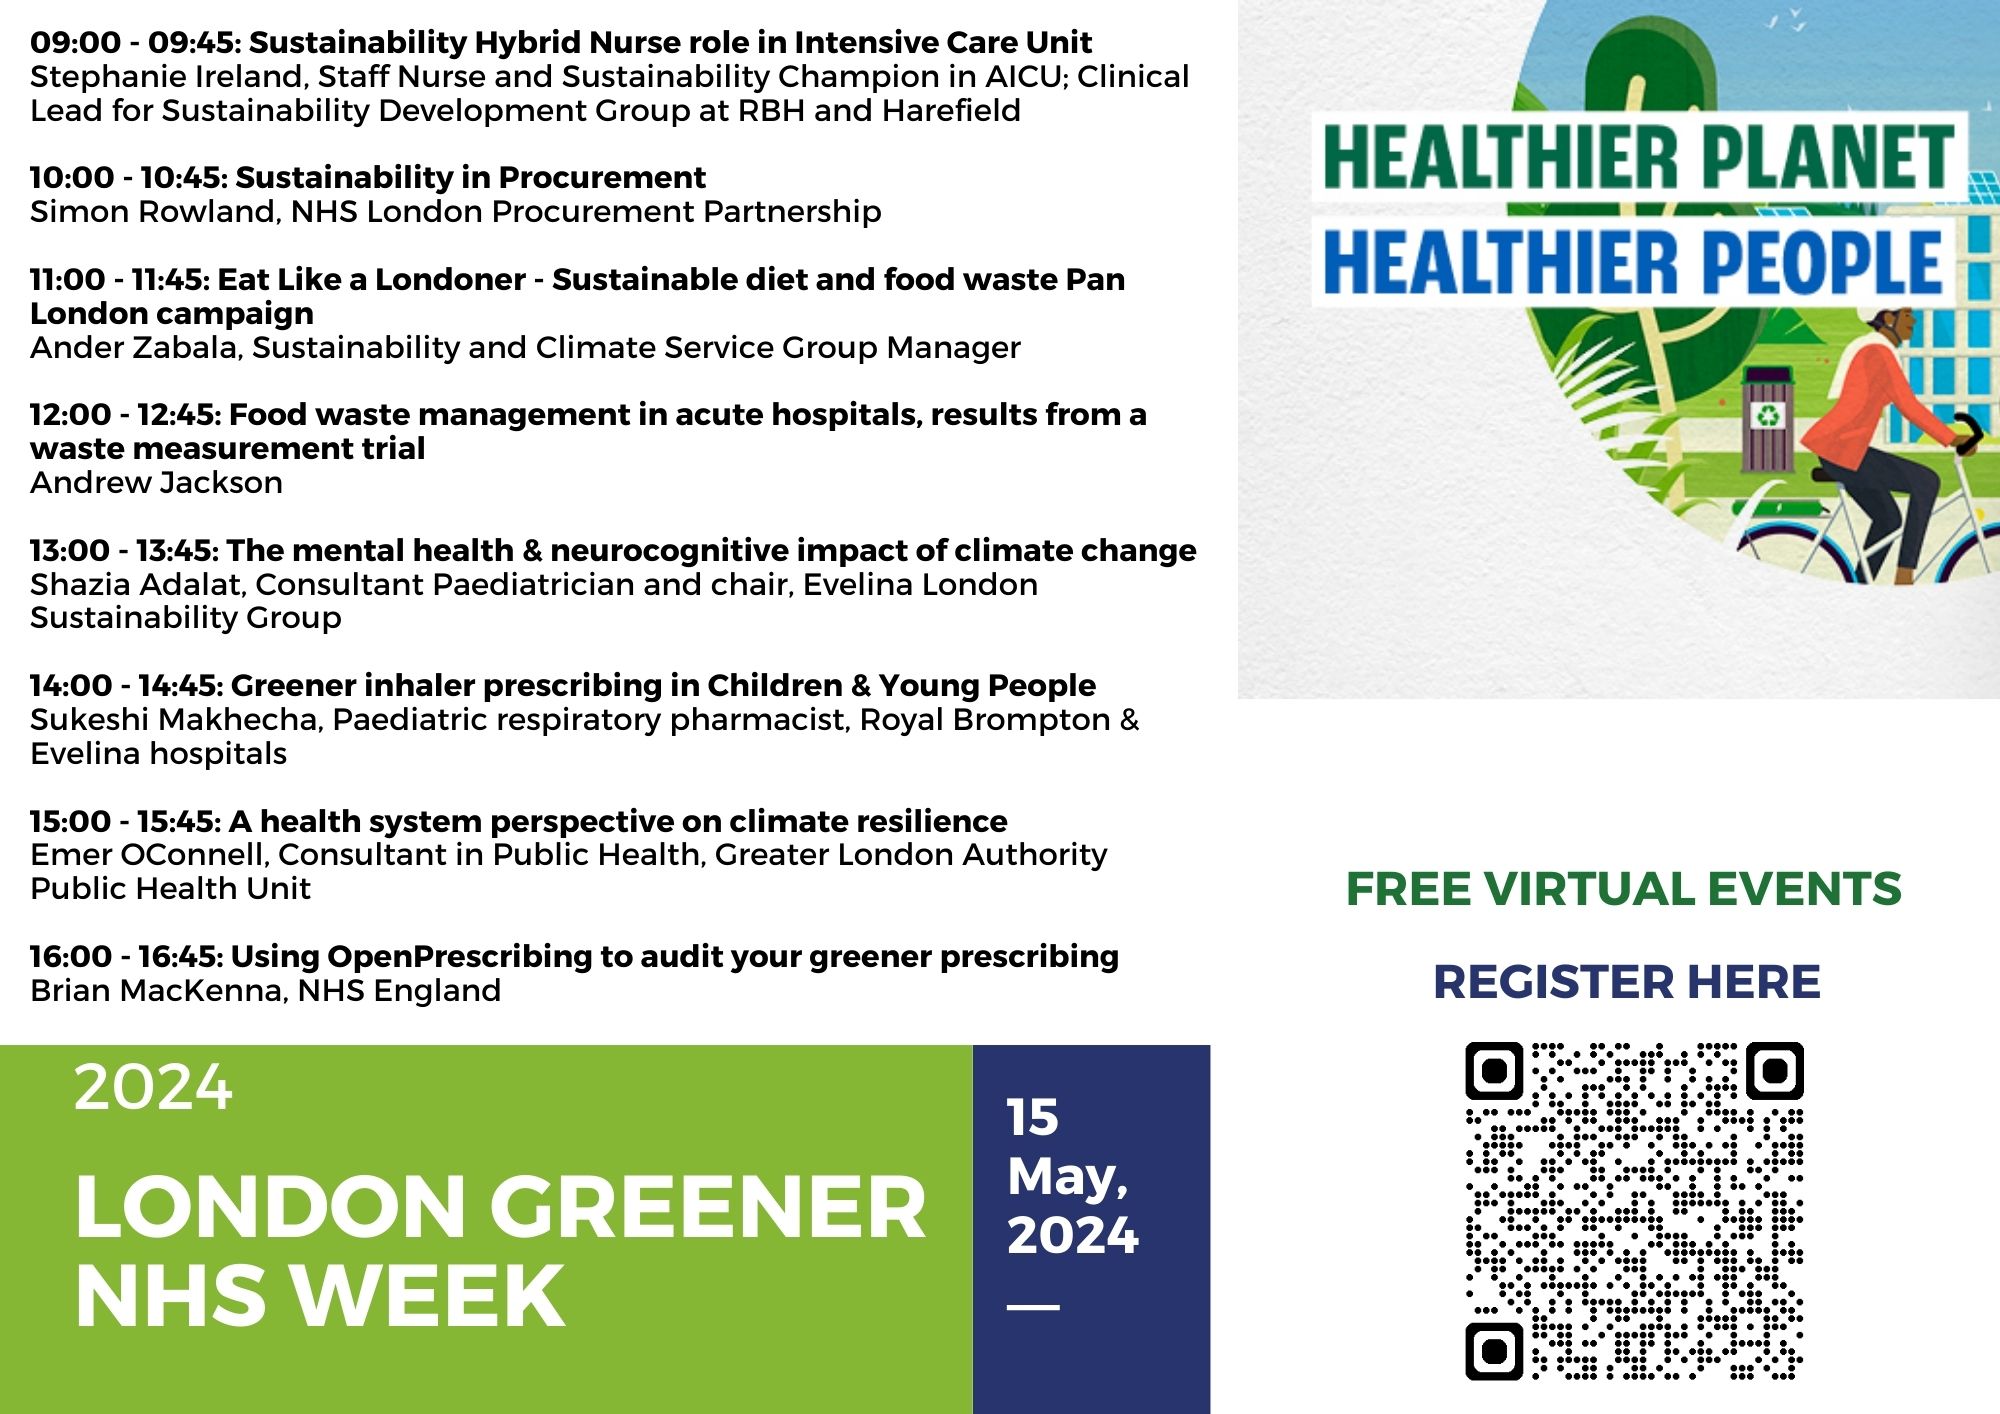 London Green Week Event - Wednesday 15 May 2024